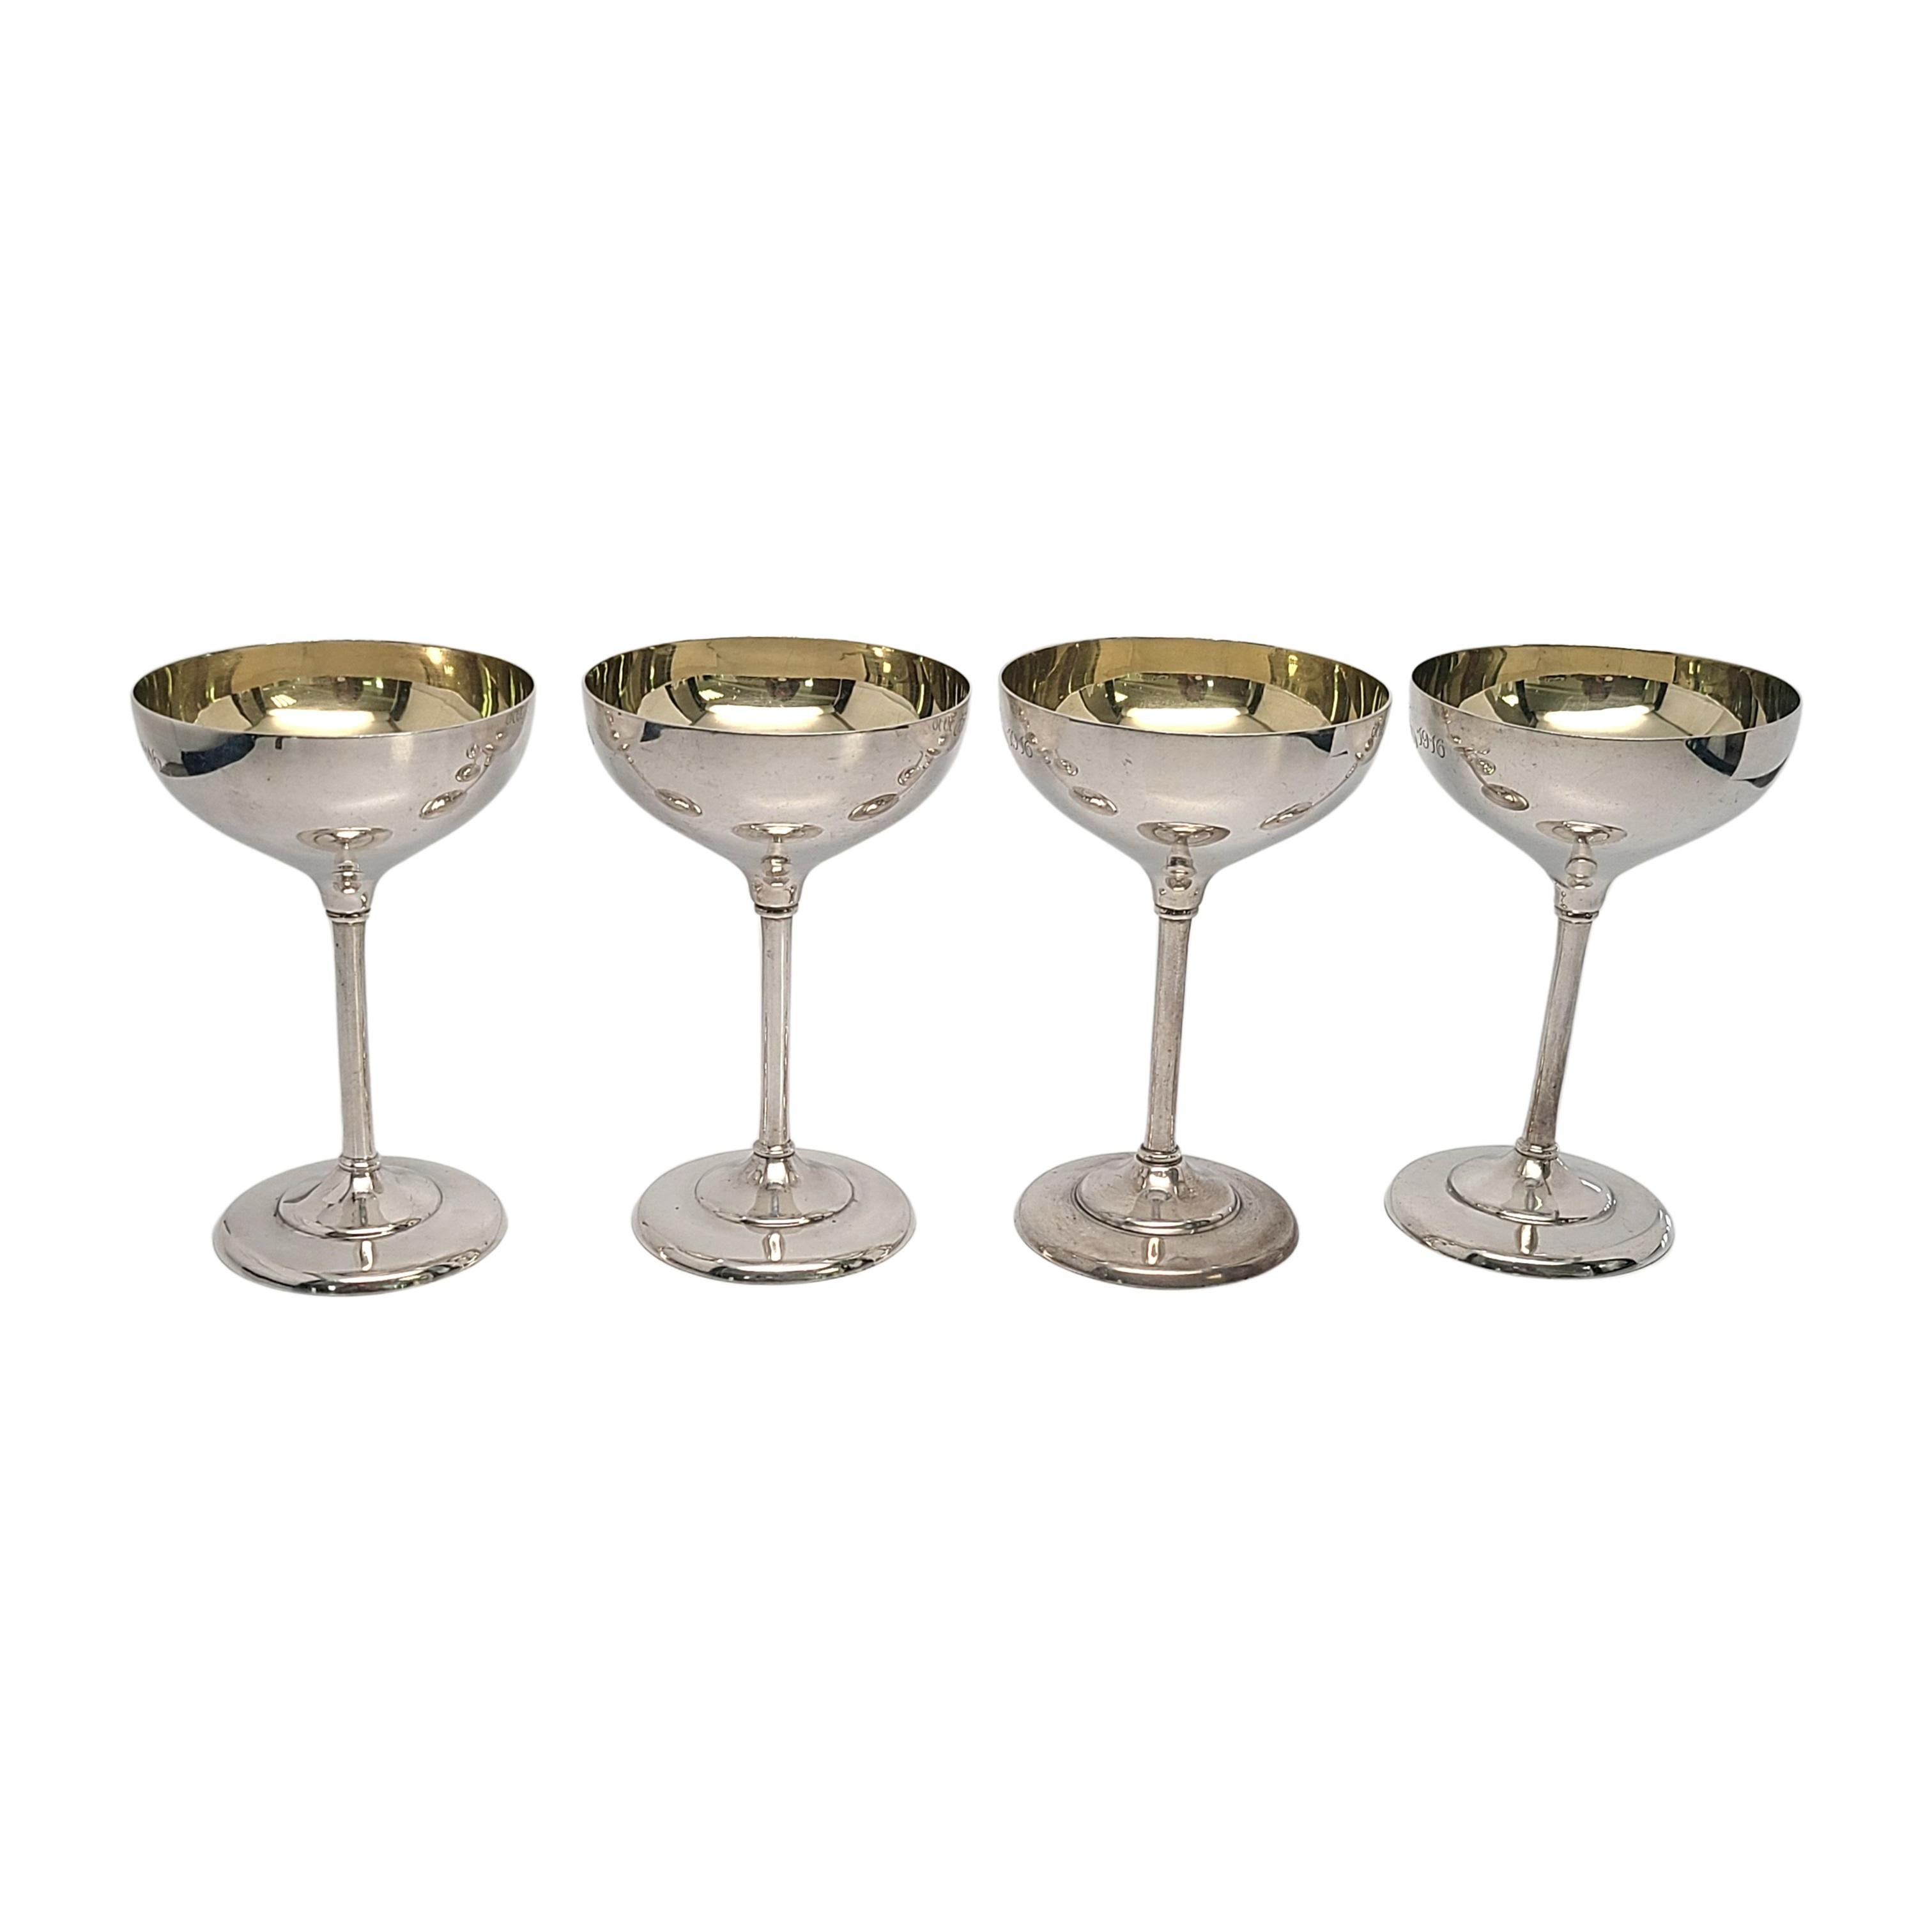 Set of 4 sterling silver champagne or cocktail goblets by Barbour Silver Co for Bailey, Banks & Biddle.

Engraving appears to be 1891 T&J 1916

A simple and classic child polished design with gold wash interior. Long stem and shallow cup. Engraving